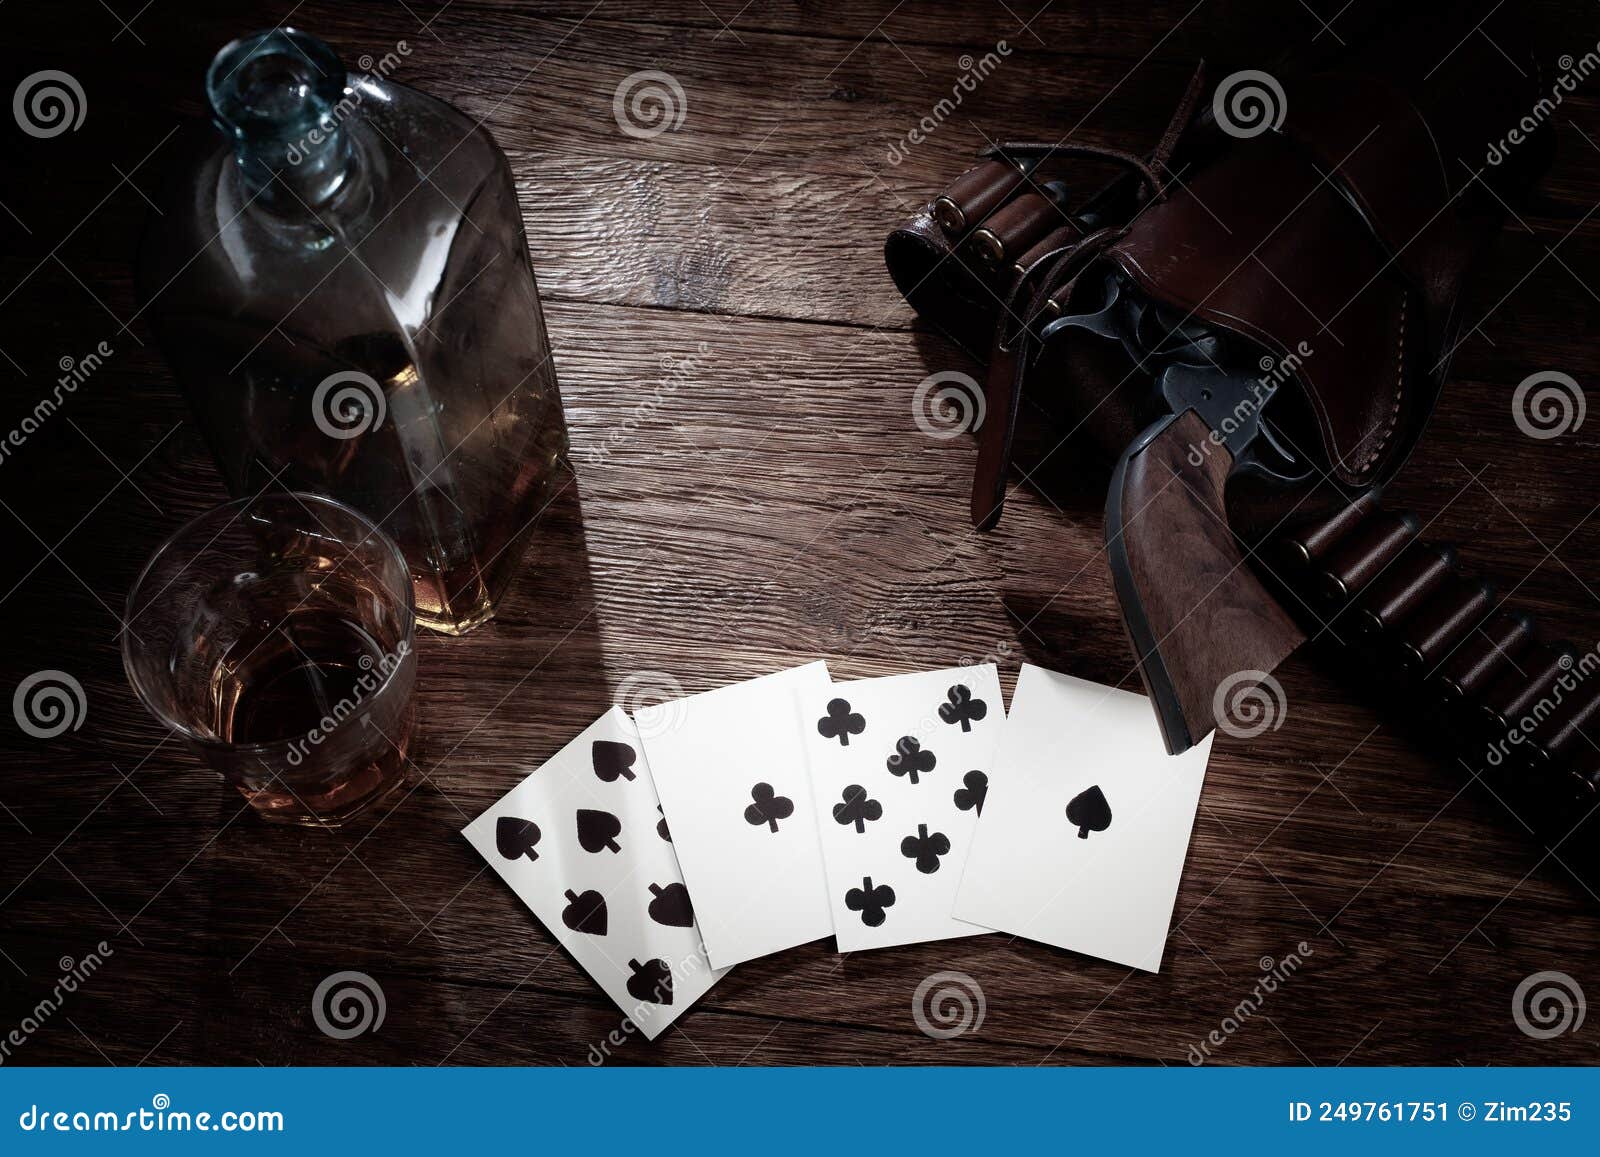 wild west gambling. dead man`s hand. two-pair poker hand consisting of the black aces and black eights, held by old west folk her